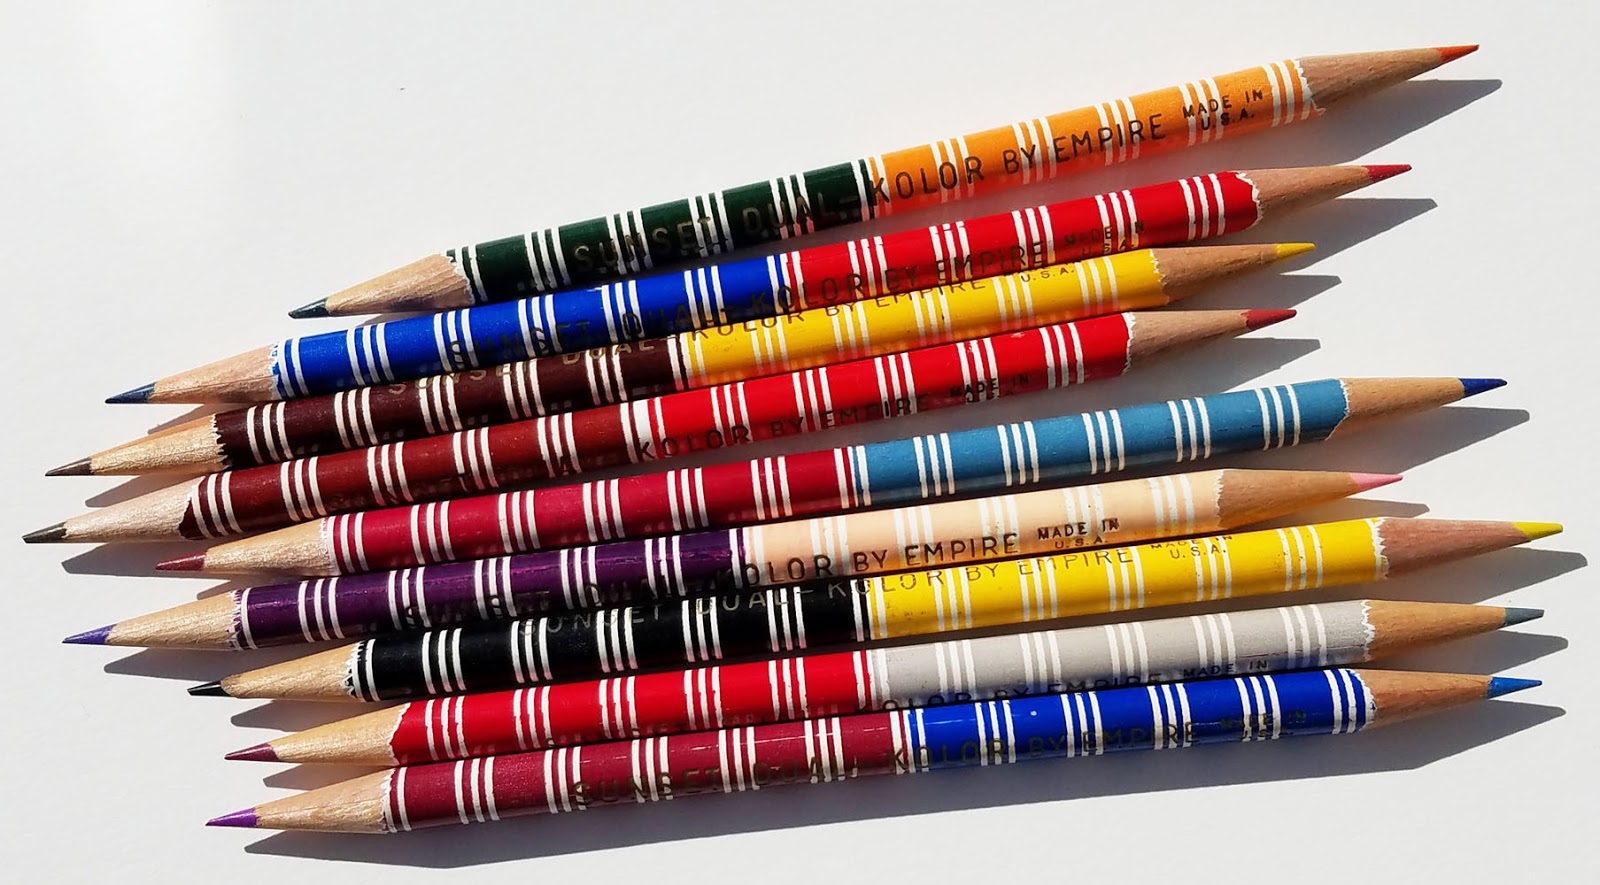 Fueled by Clouds & Coffee: Review: Techjob Mechanical Colored Pencils